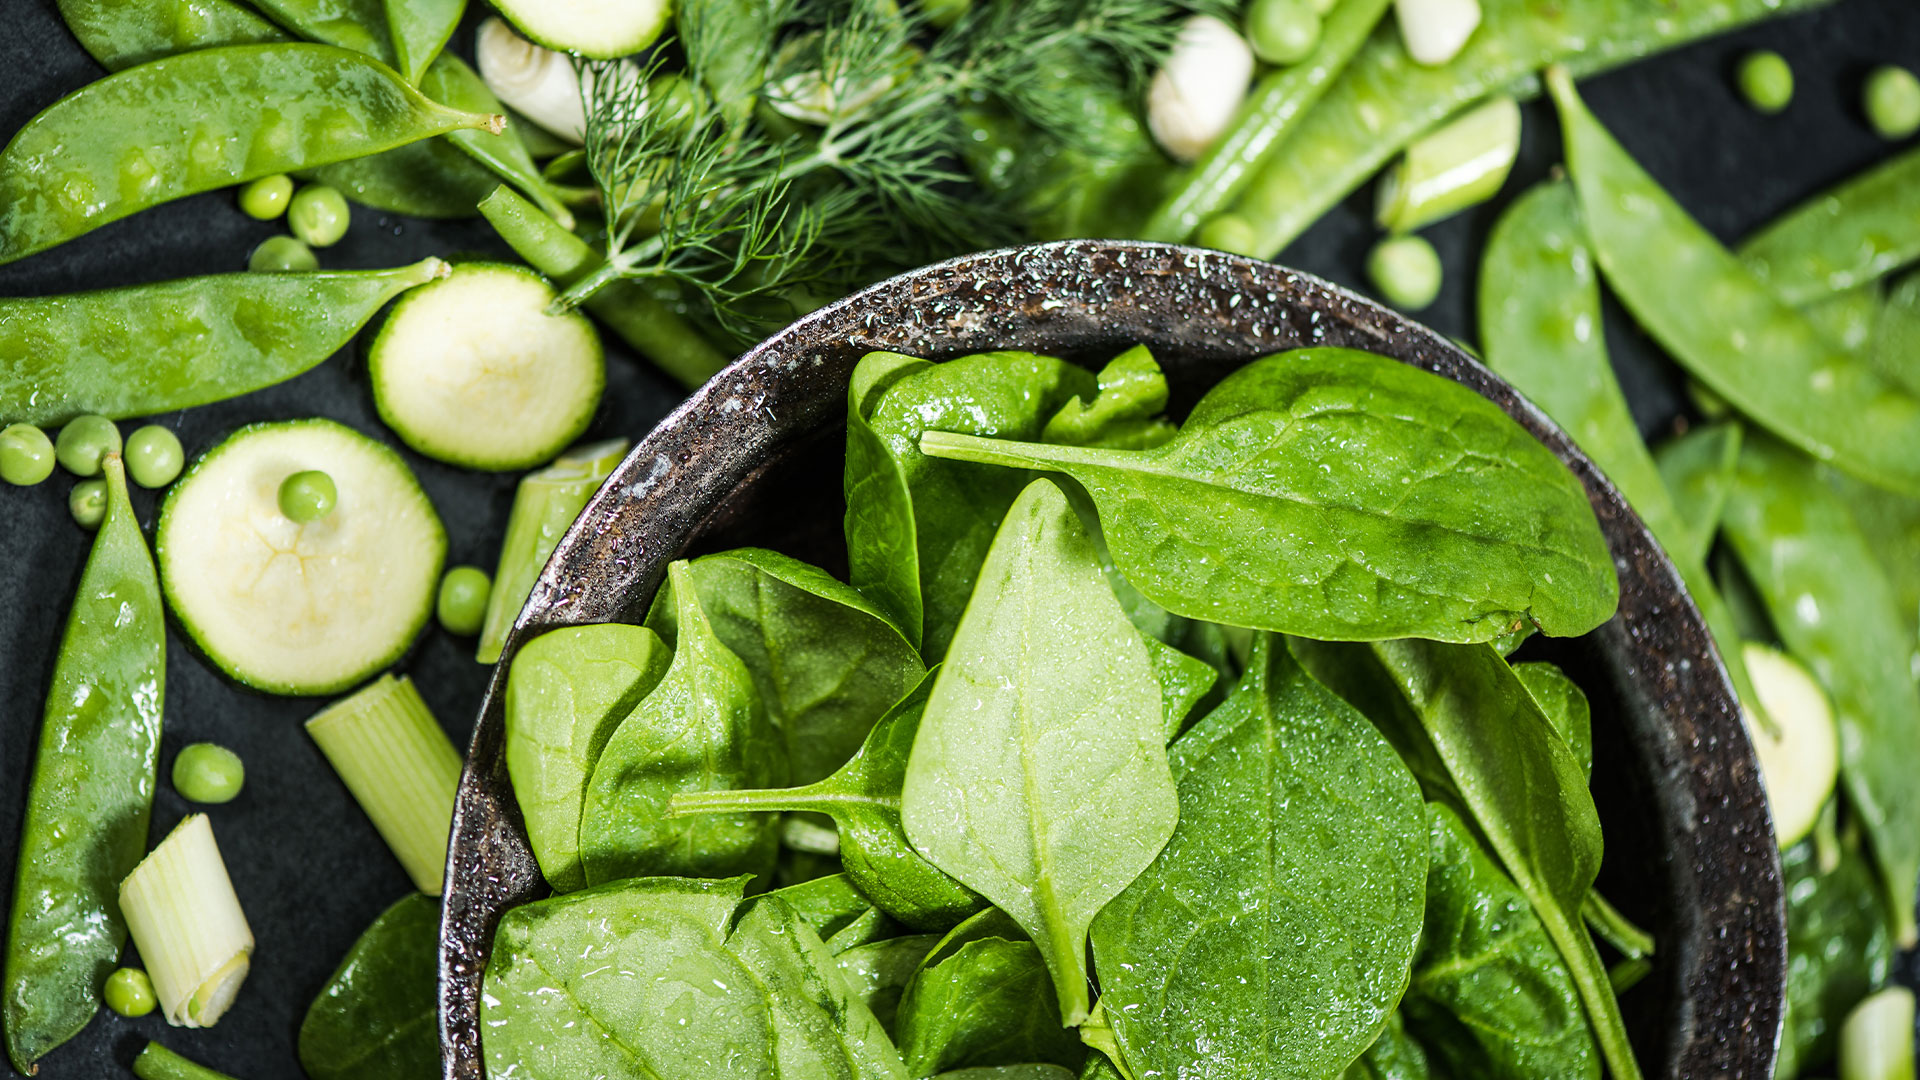 Image of leafy greens and green vegetables